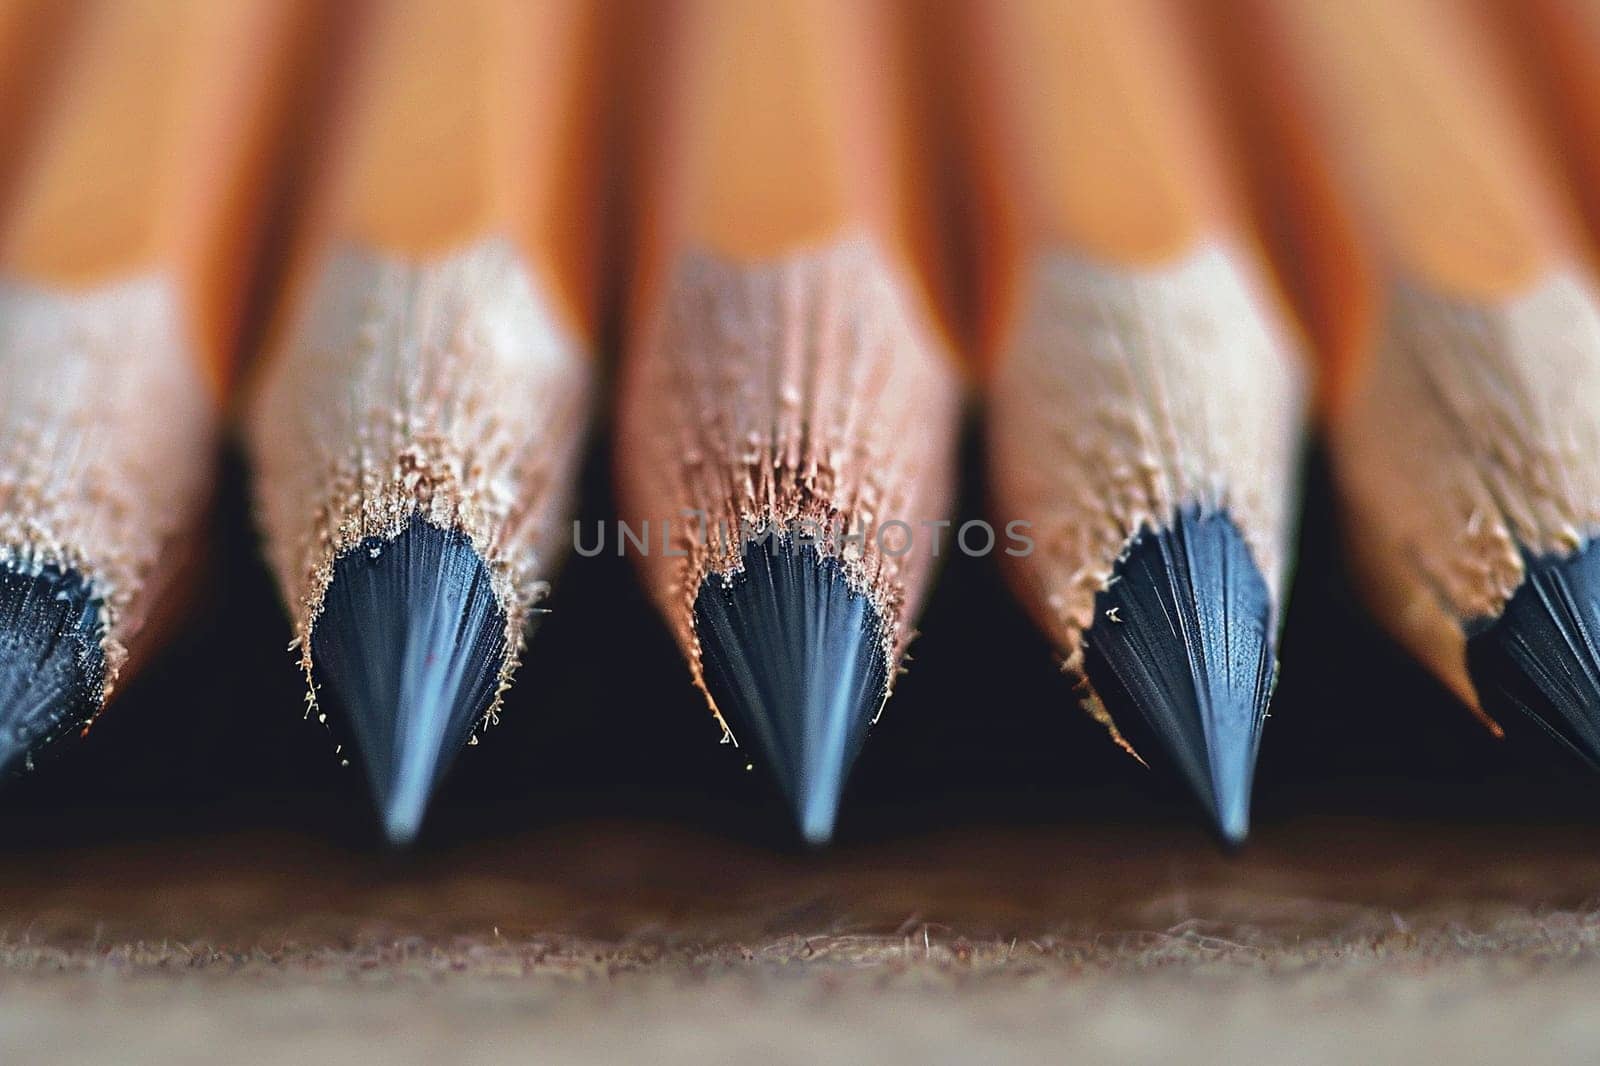 Three simple pencils, with well-sharpened leads, close-up